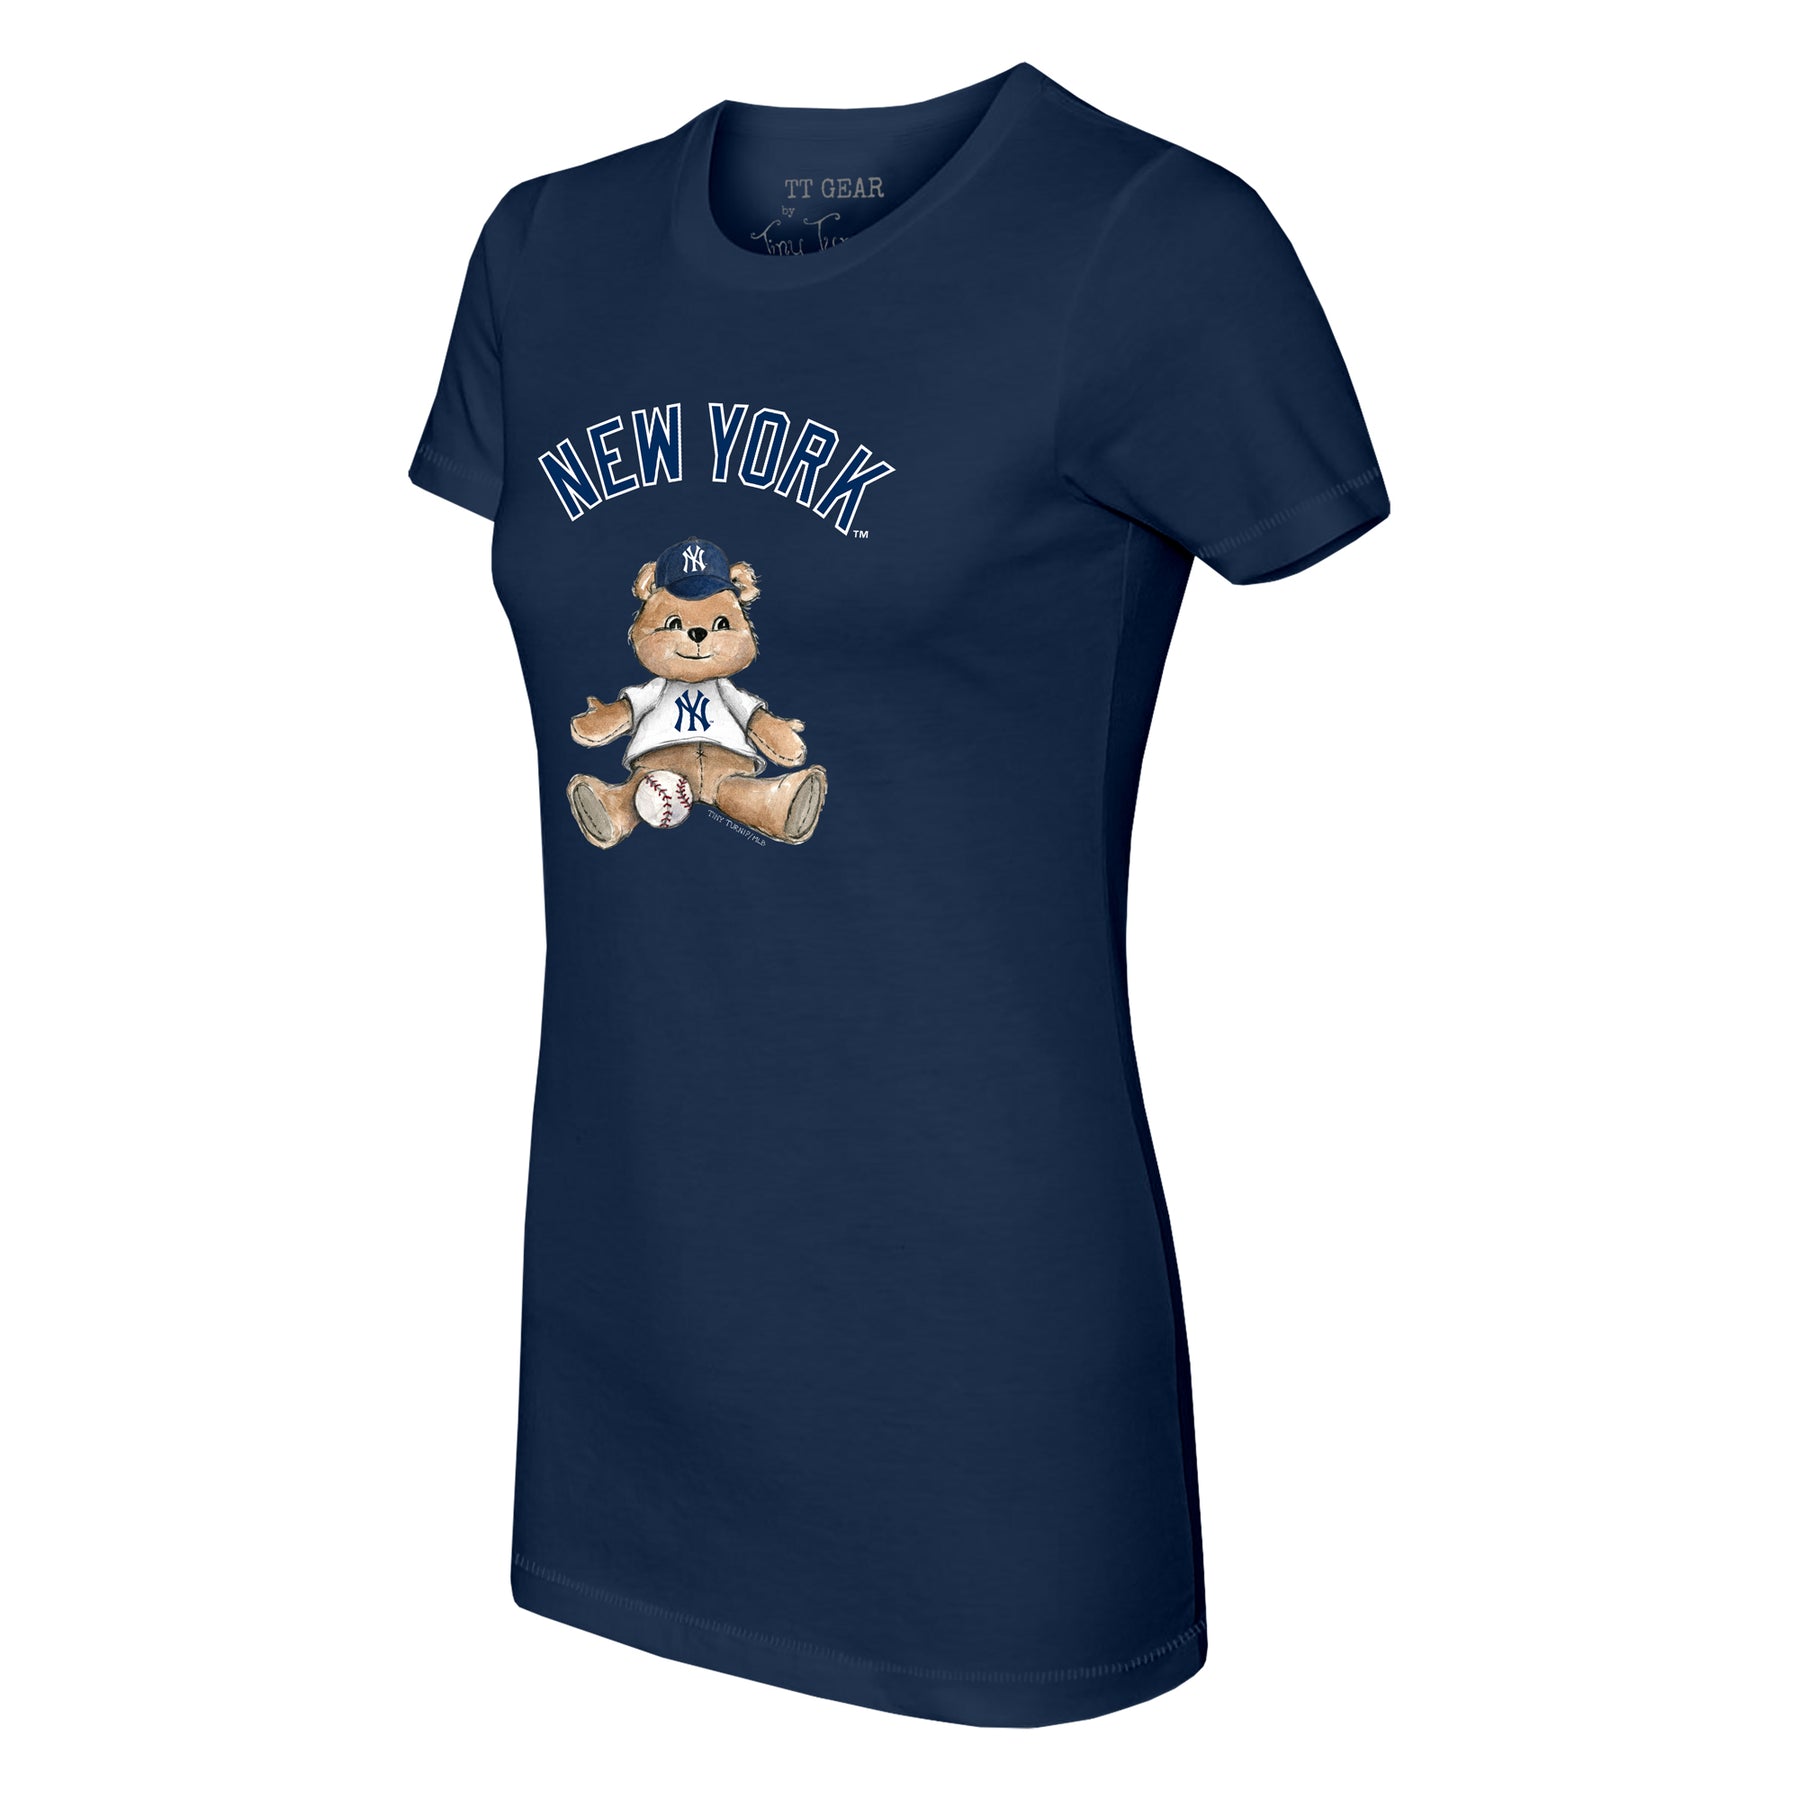 New York Yankees NY T-Shirt - All Design Colors + Sizes S-5XL